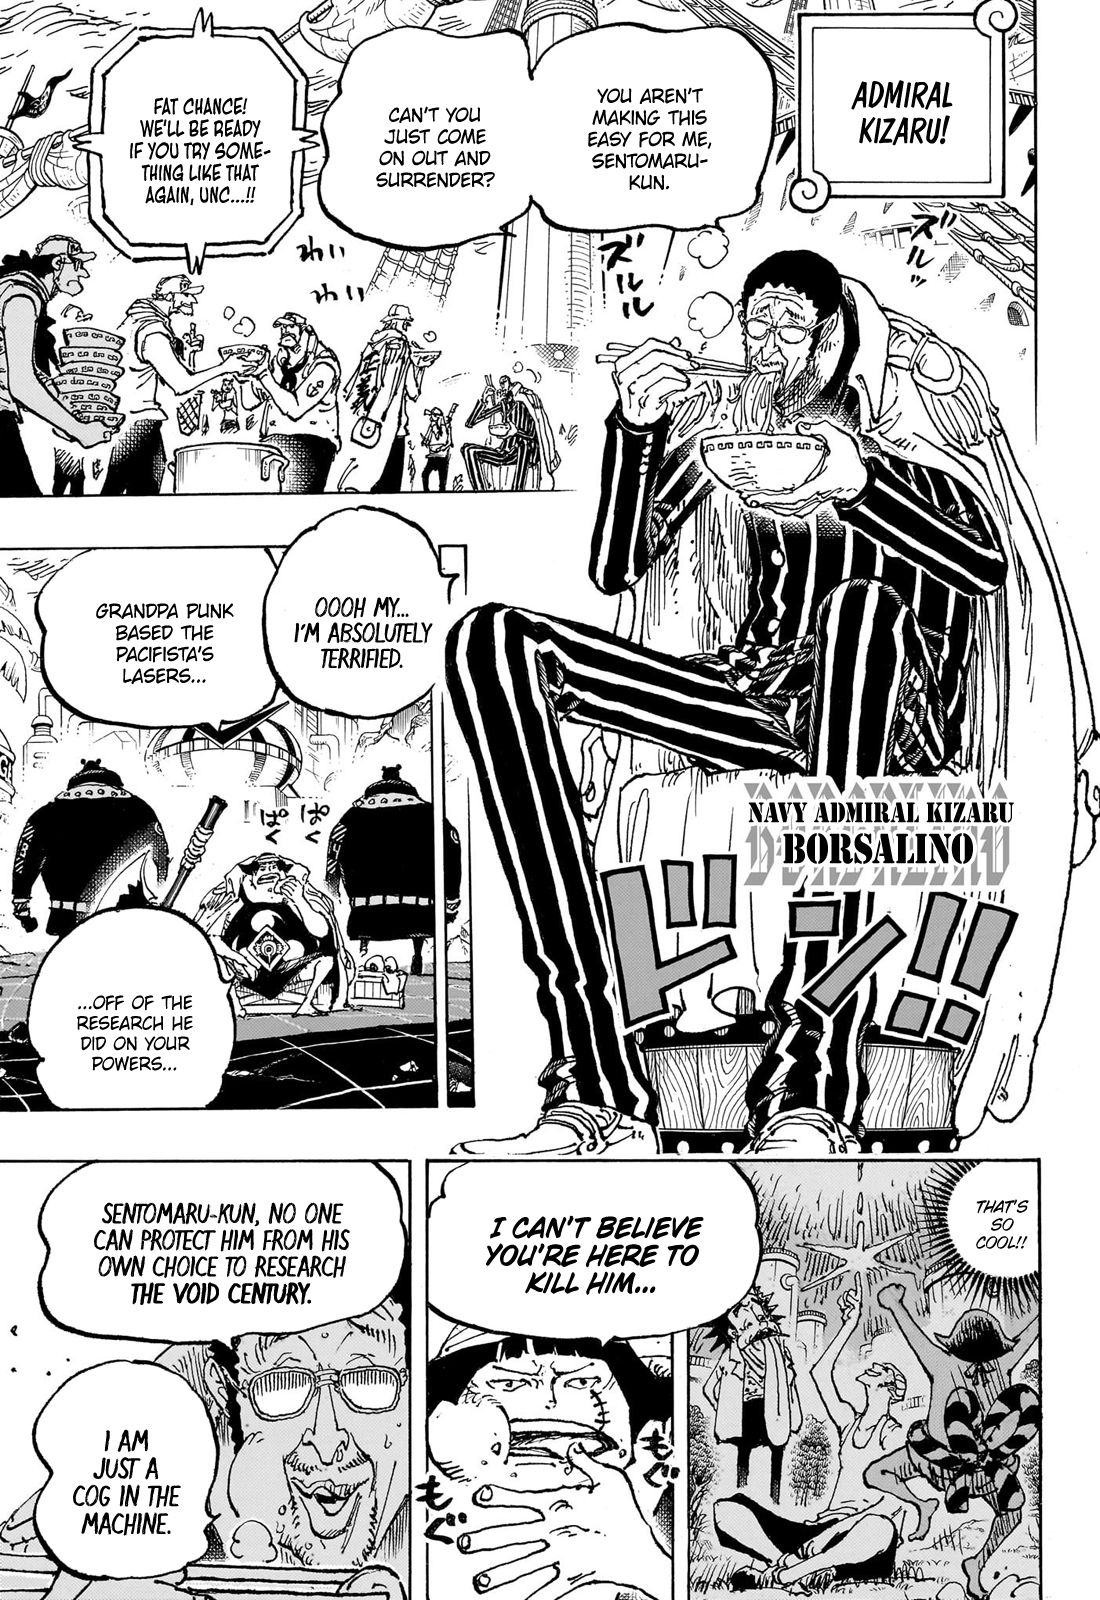 One Piece Chapter 1065 Reddit Spoilers, Count Down, English Raw